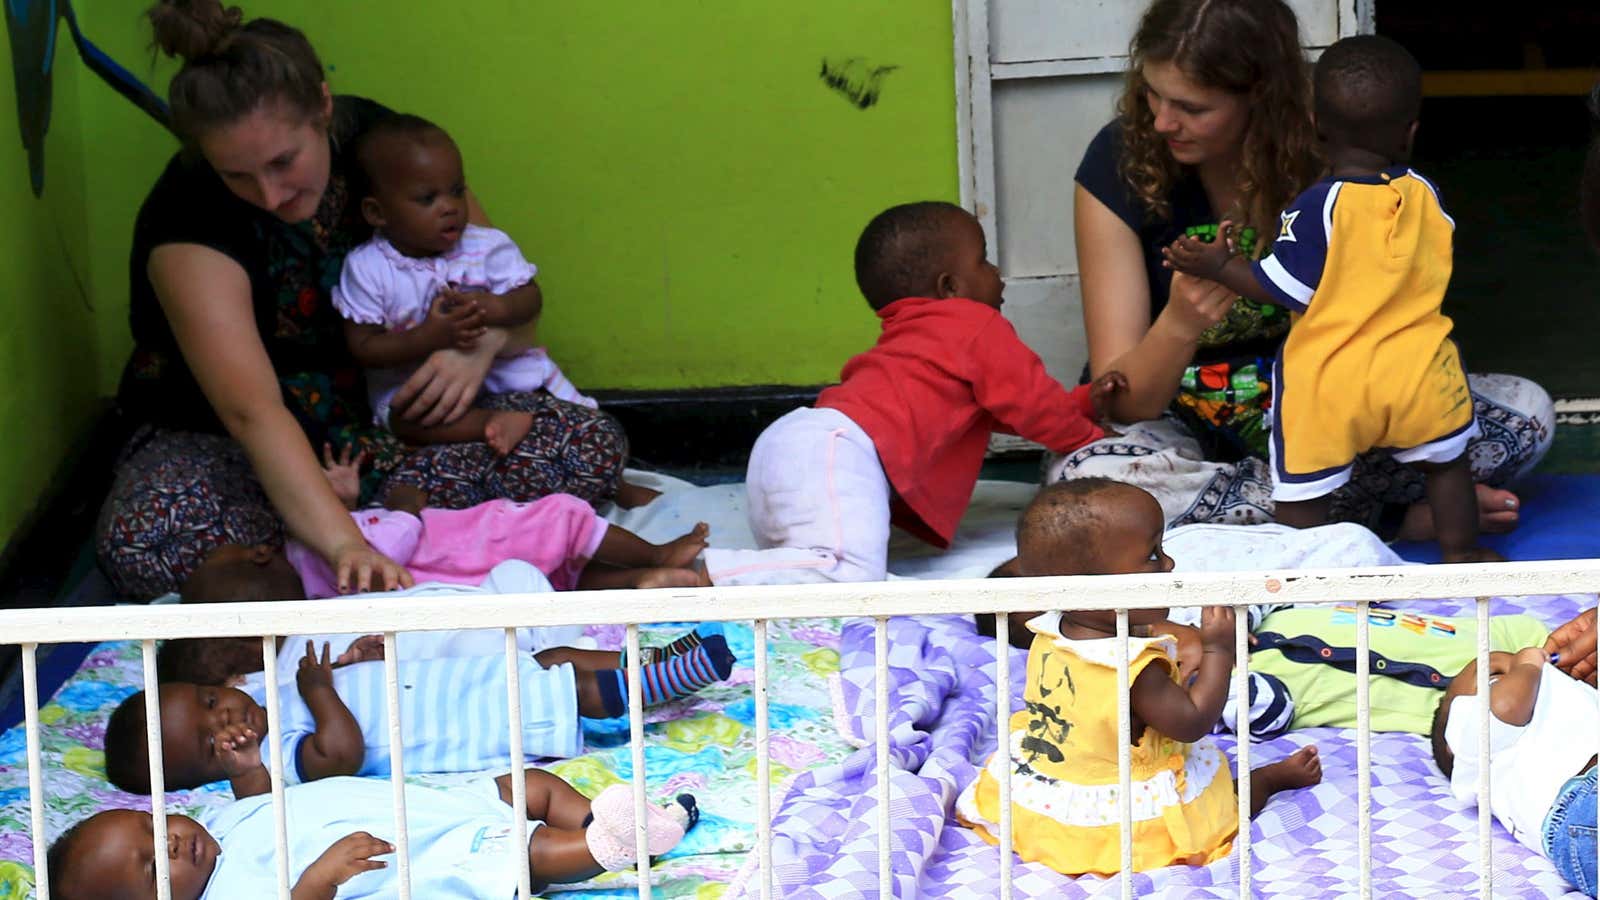 Local and foreign volunteers play with abandoned babies at children at a home in Uganda’s capital, Kampala